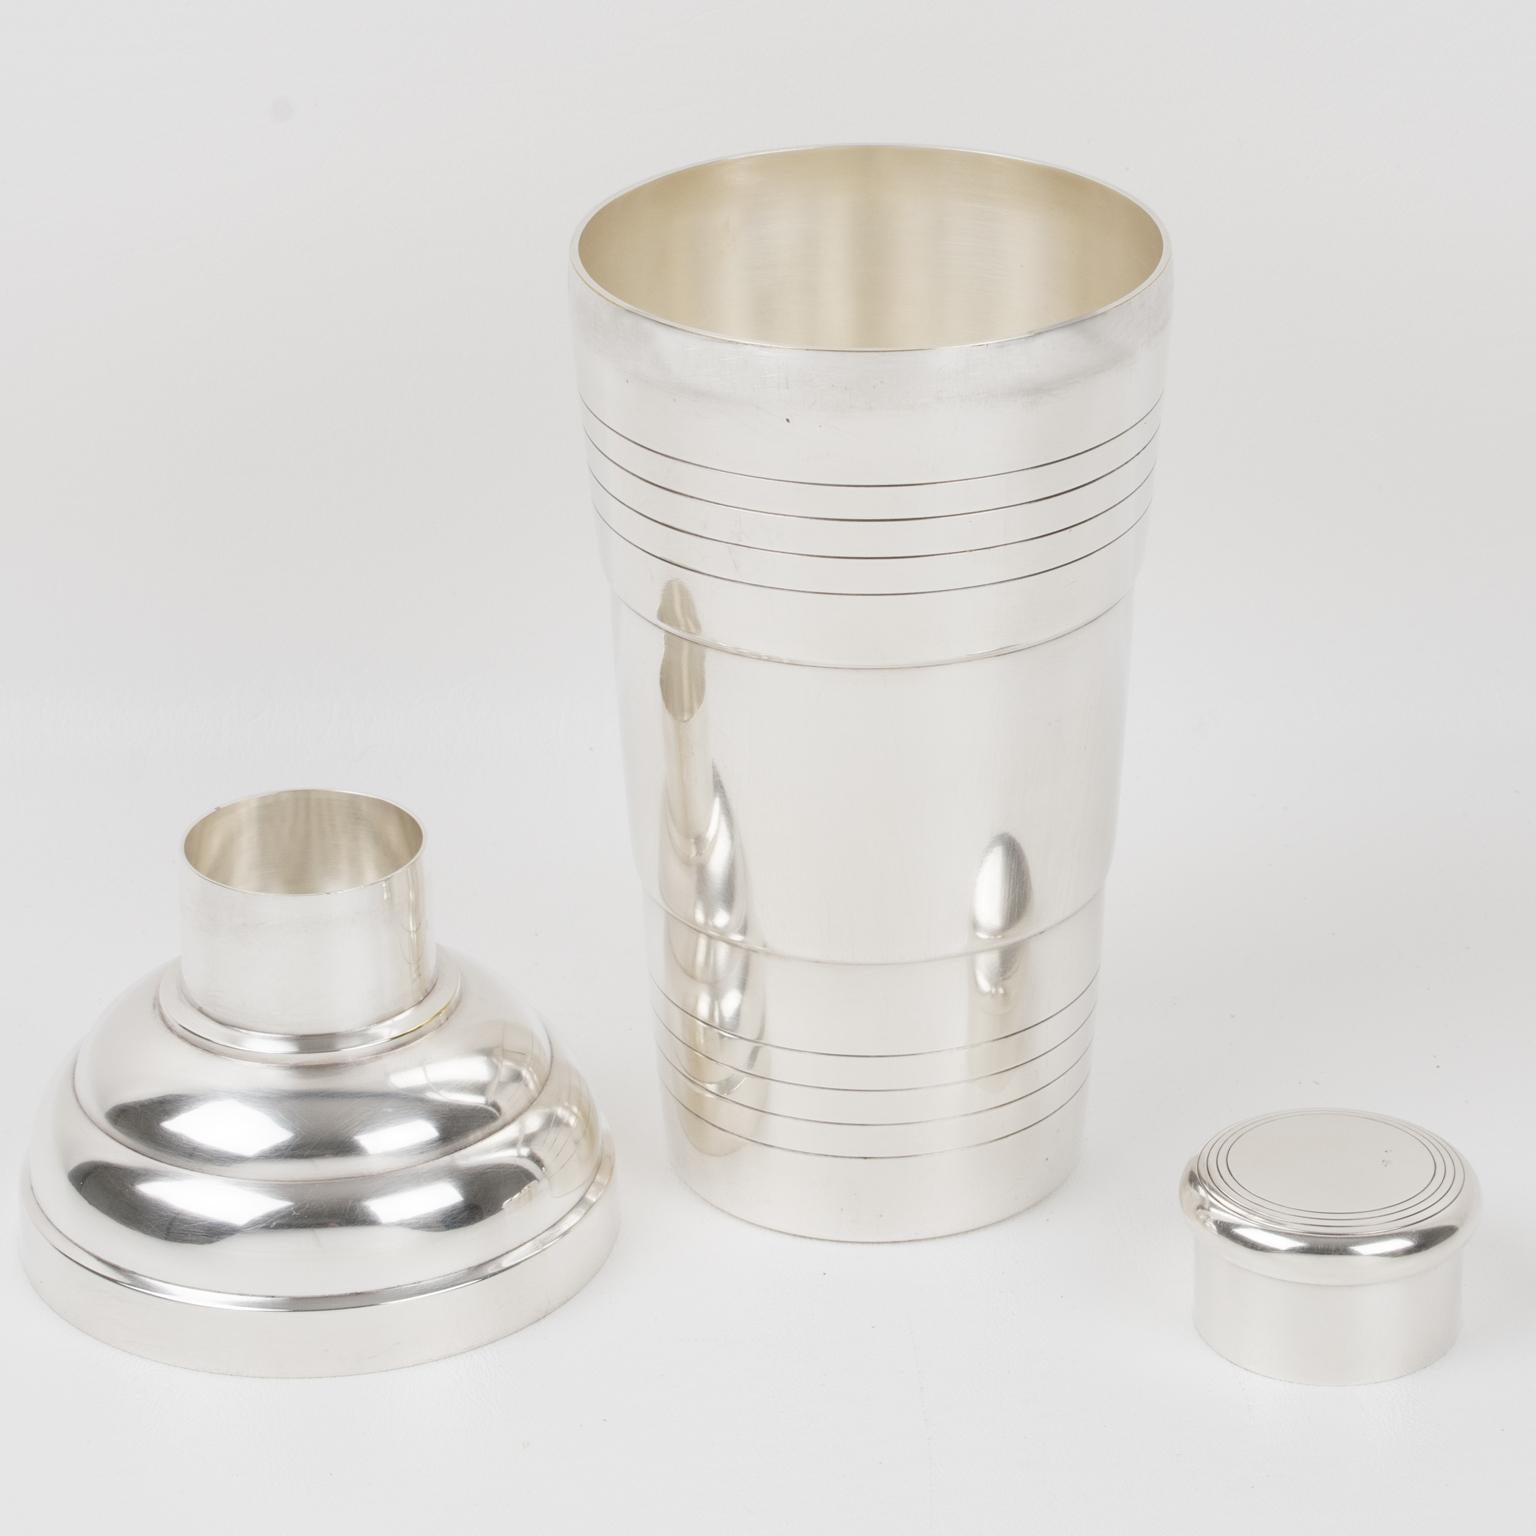 Lovely French Art Deco silver plate cylindrical cocktail or Martini shaker by silversmith Demarquay, Paris. Three-sectioned designed cocktail shaker with removable cap and strainer. Geometric shape with typical Deco design around the container.